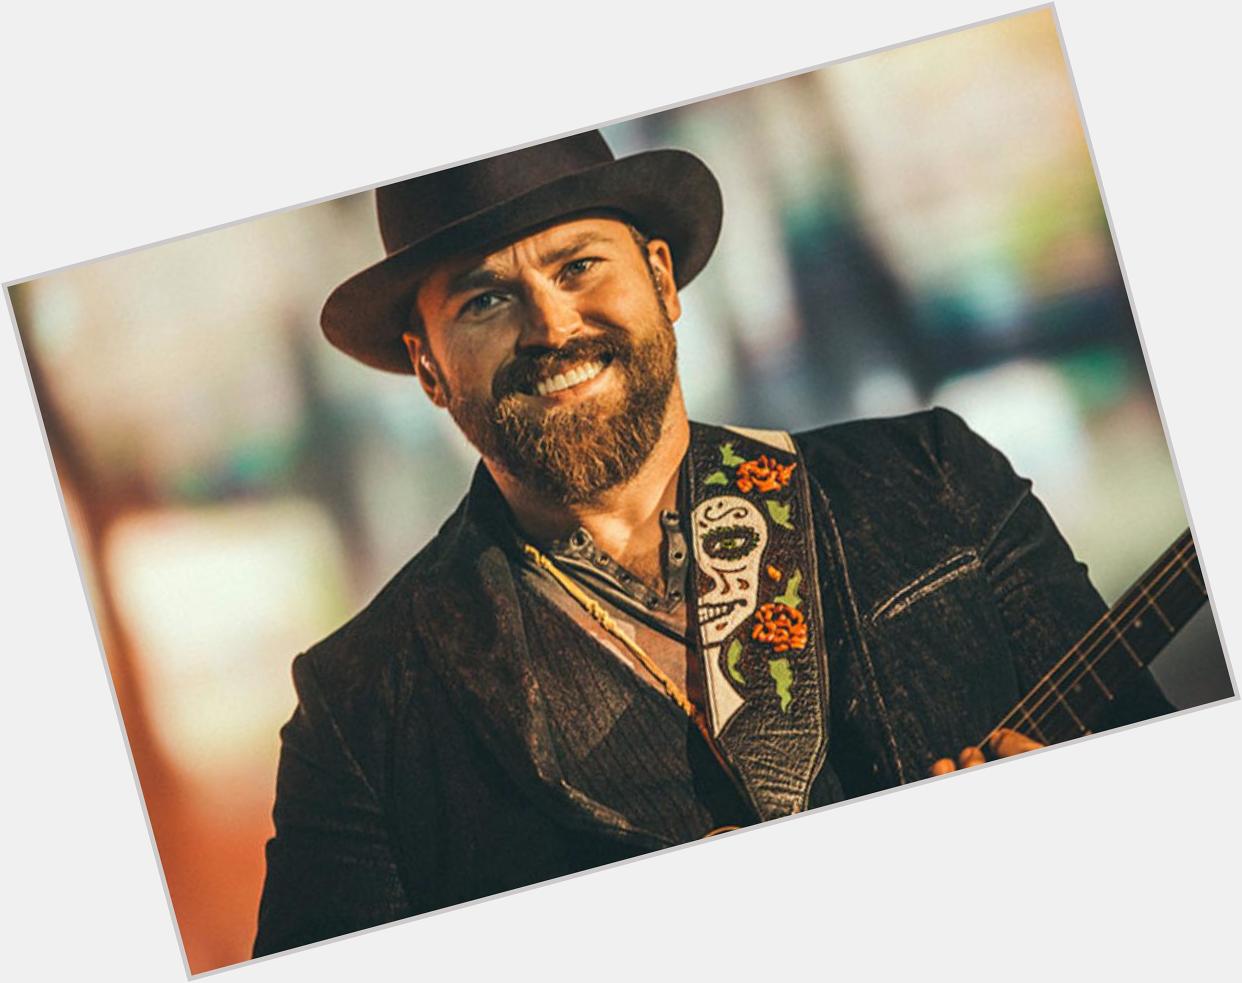 Happy birthday to Zac Brown of the the Zac Brown Band!

I hope you have a great day surrounded by friends and family! 